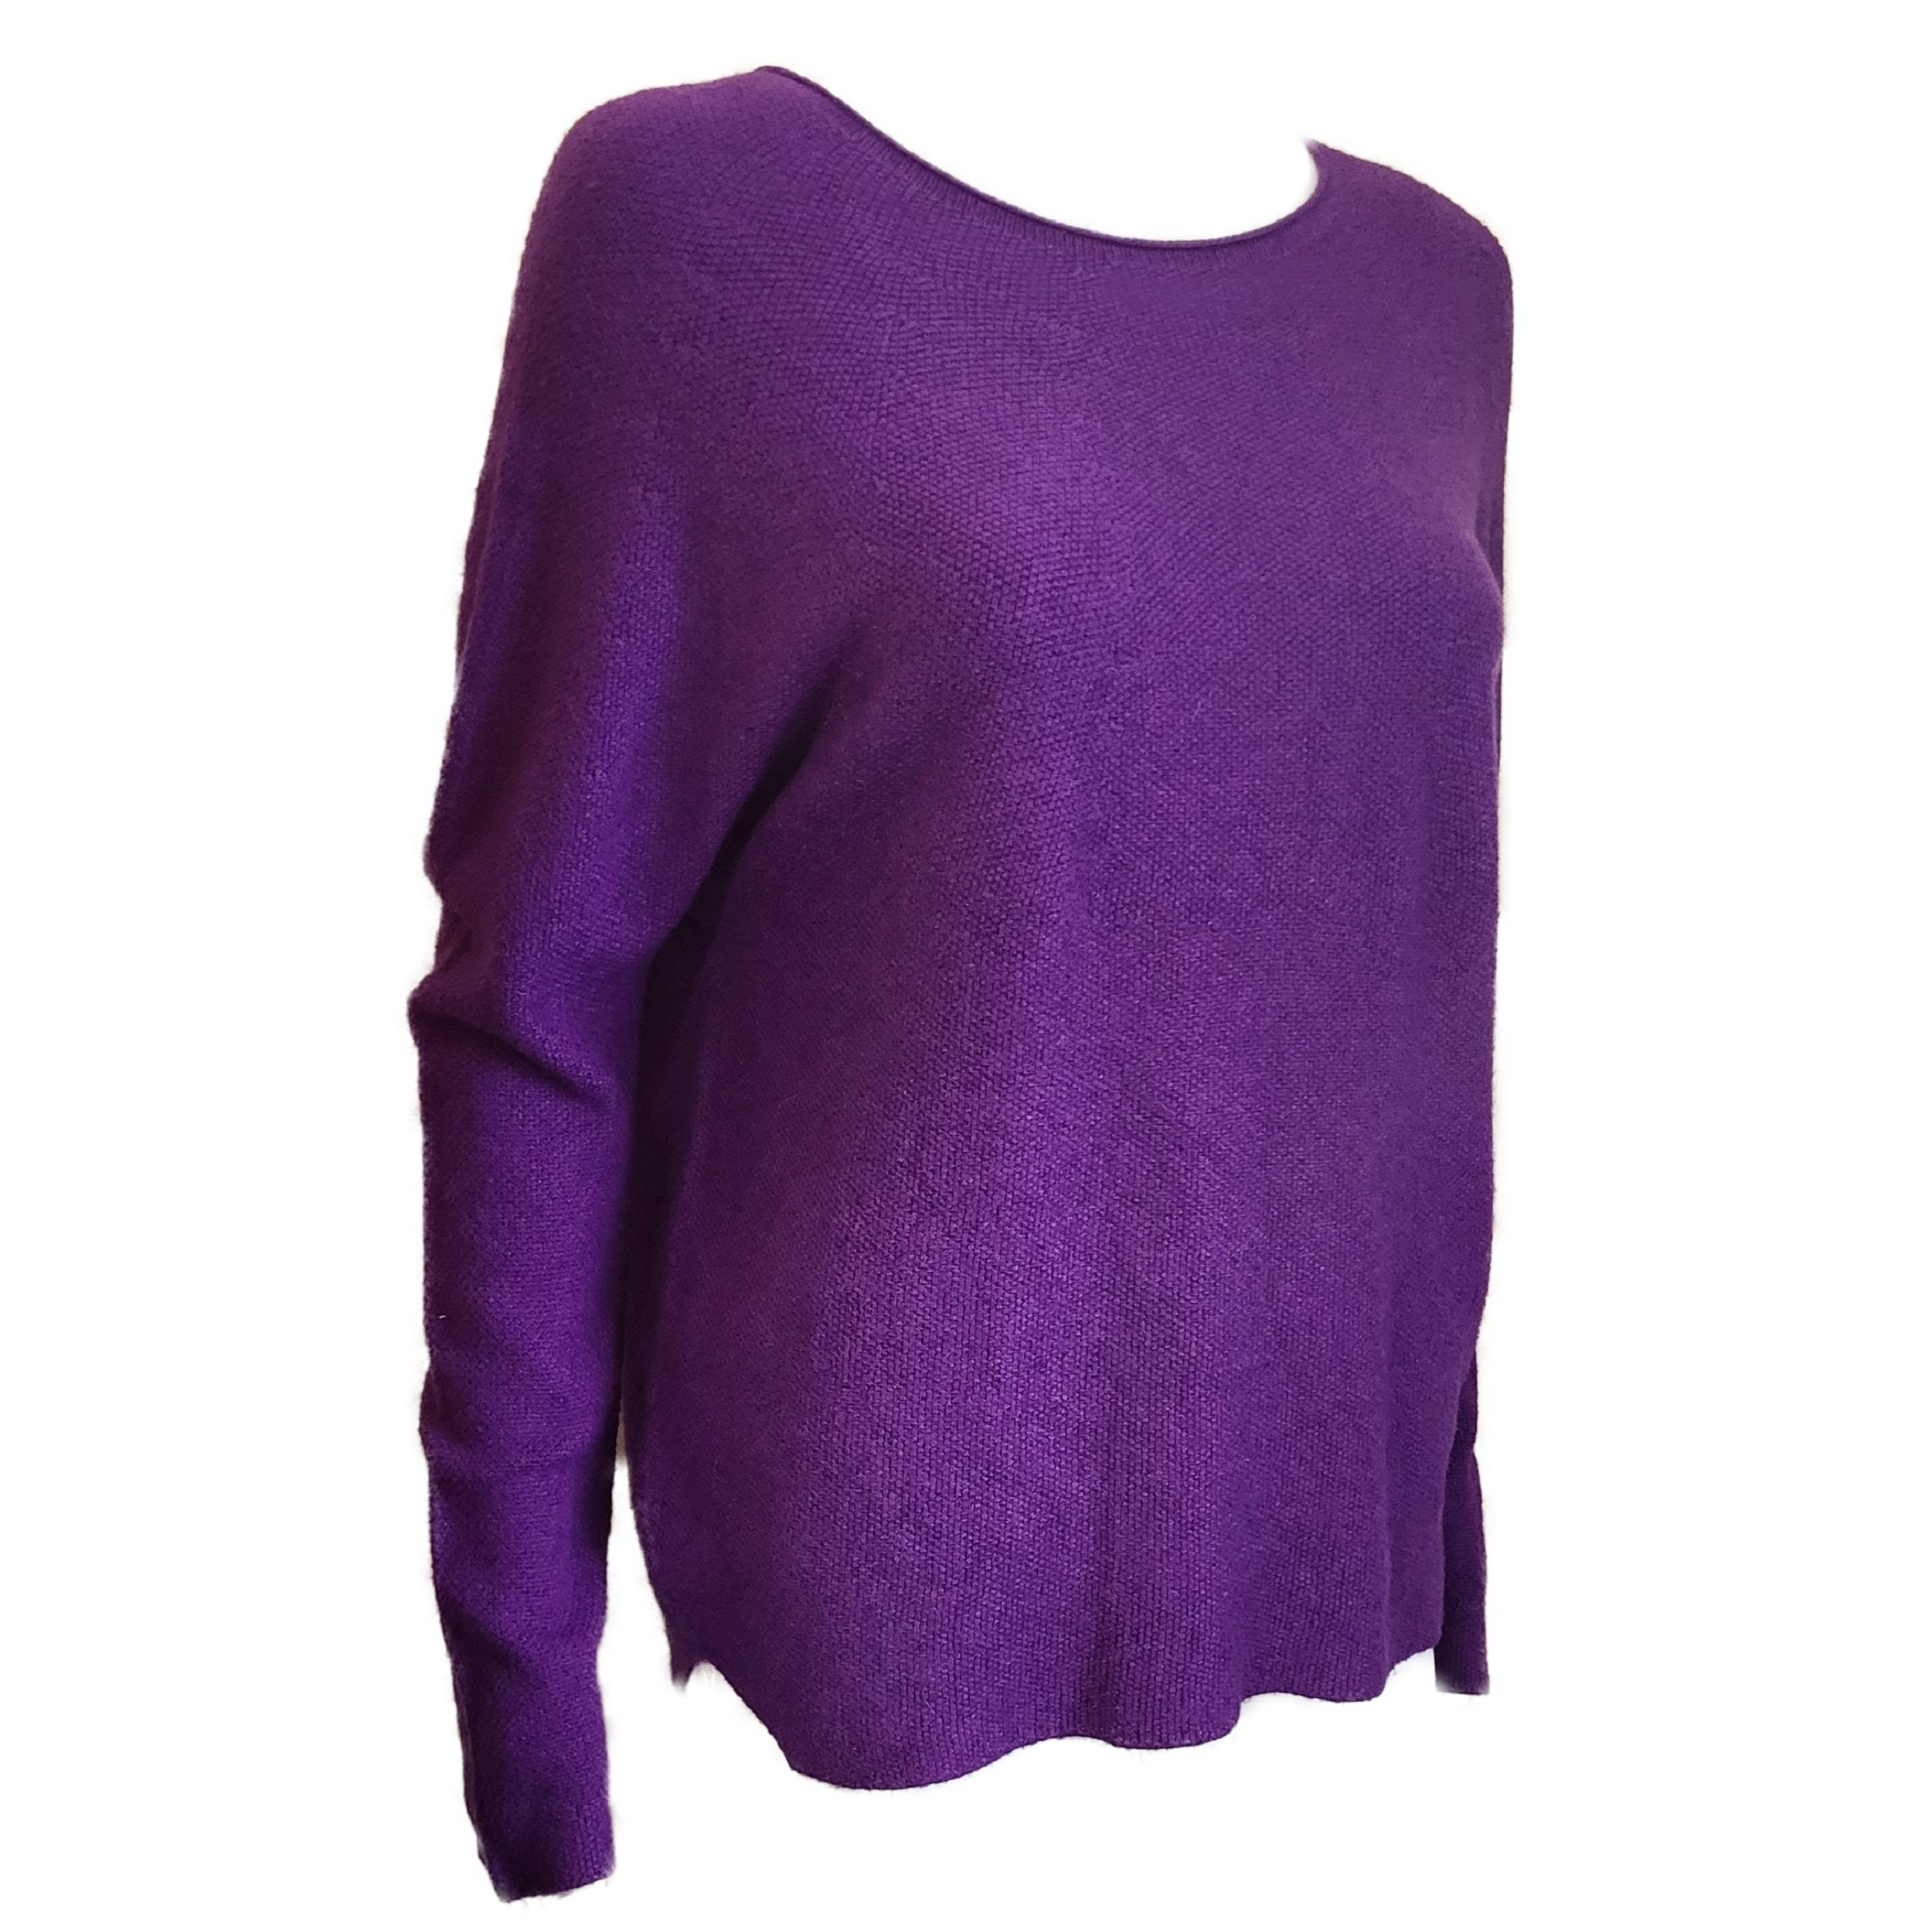 purple long sleeved jumper with long sleeves and round neck